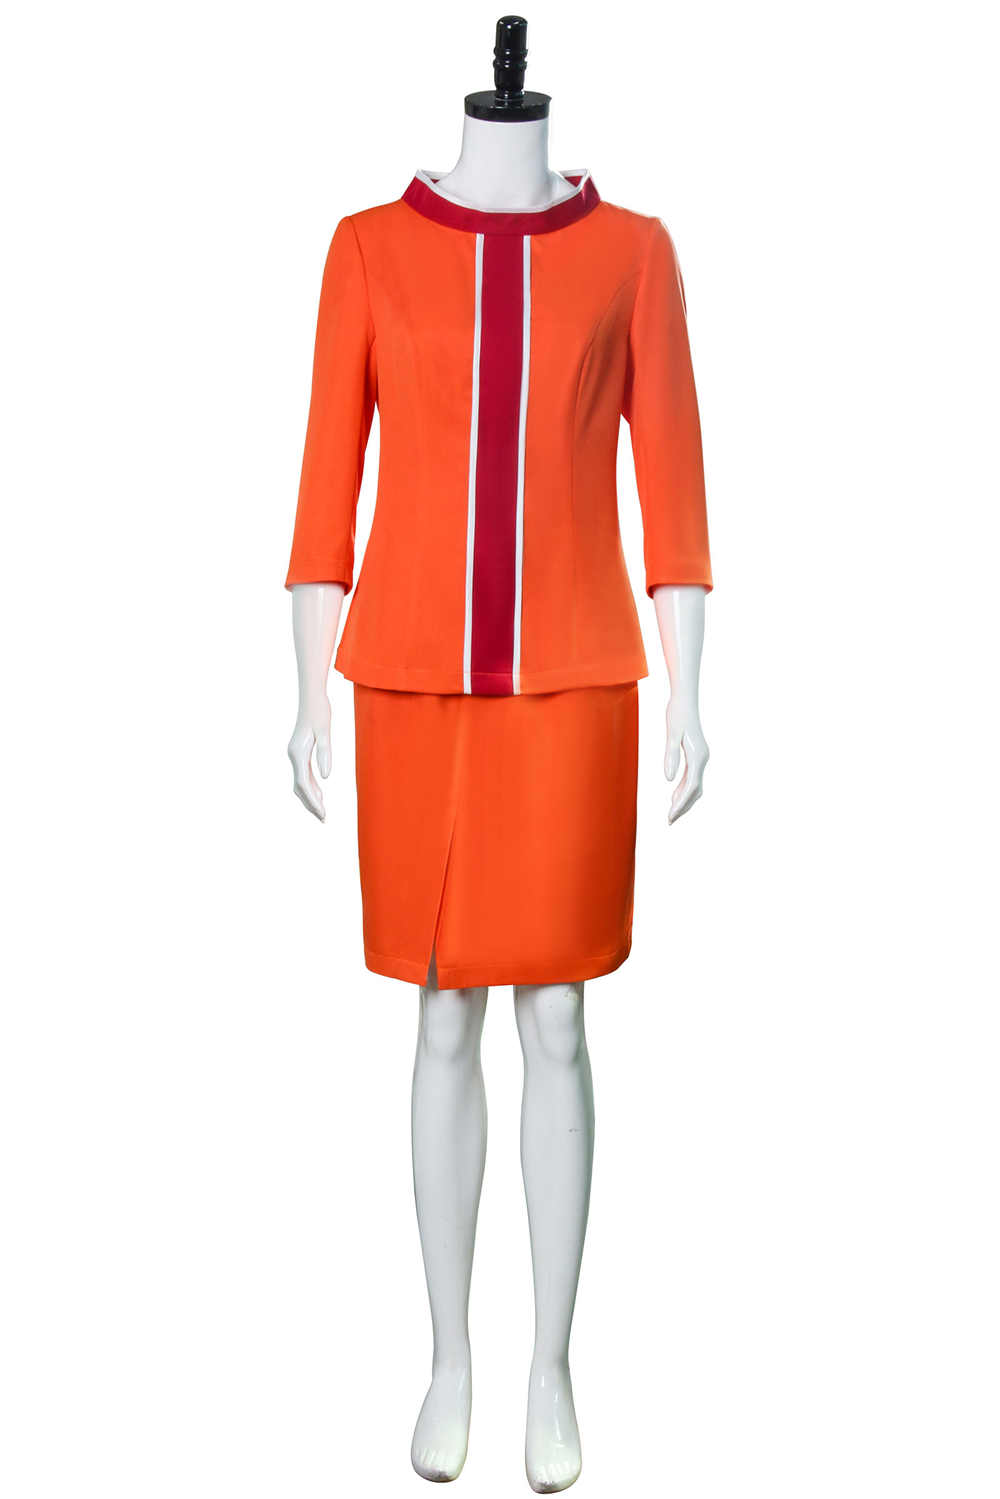 2020 Comedy Wives of the Skies Stewardess Costumes Woman Flight Attendant Uniform Party Fancy Dress Outfits-Takerlama